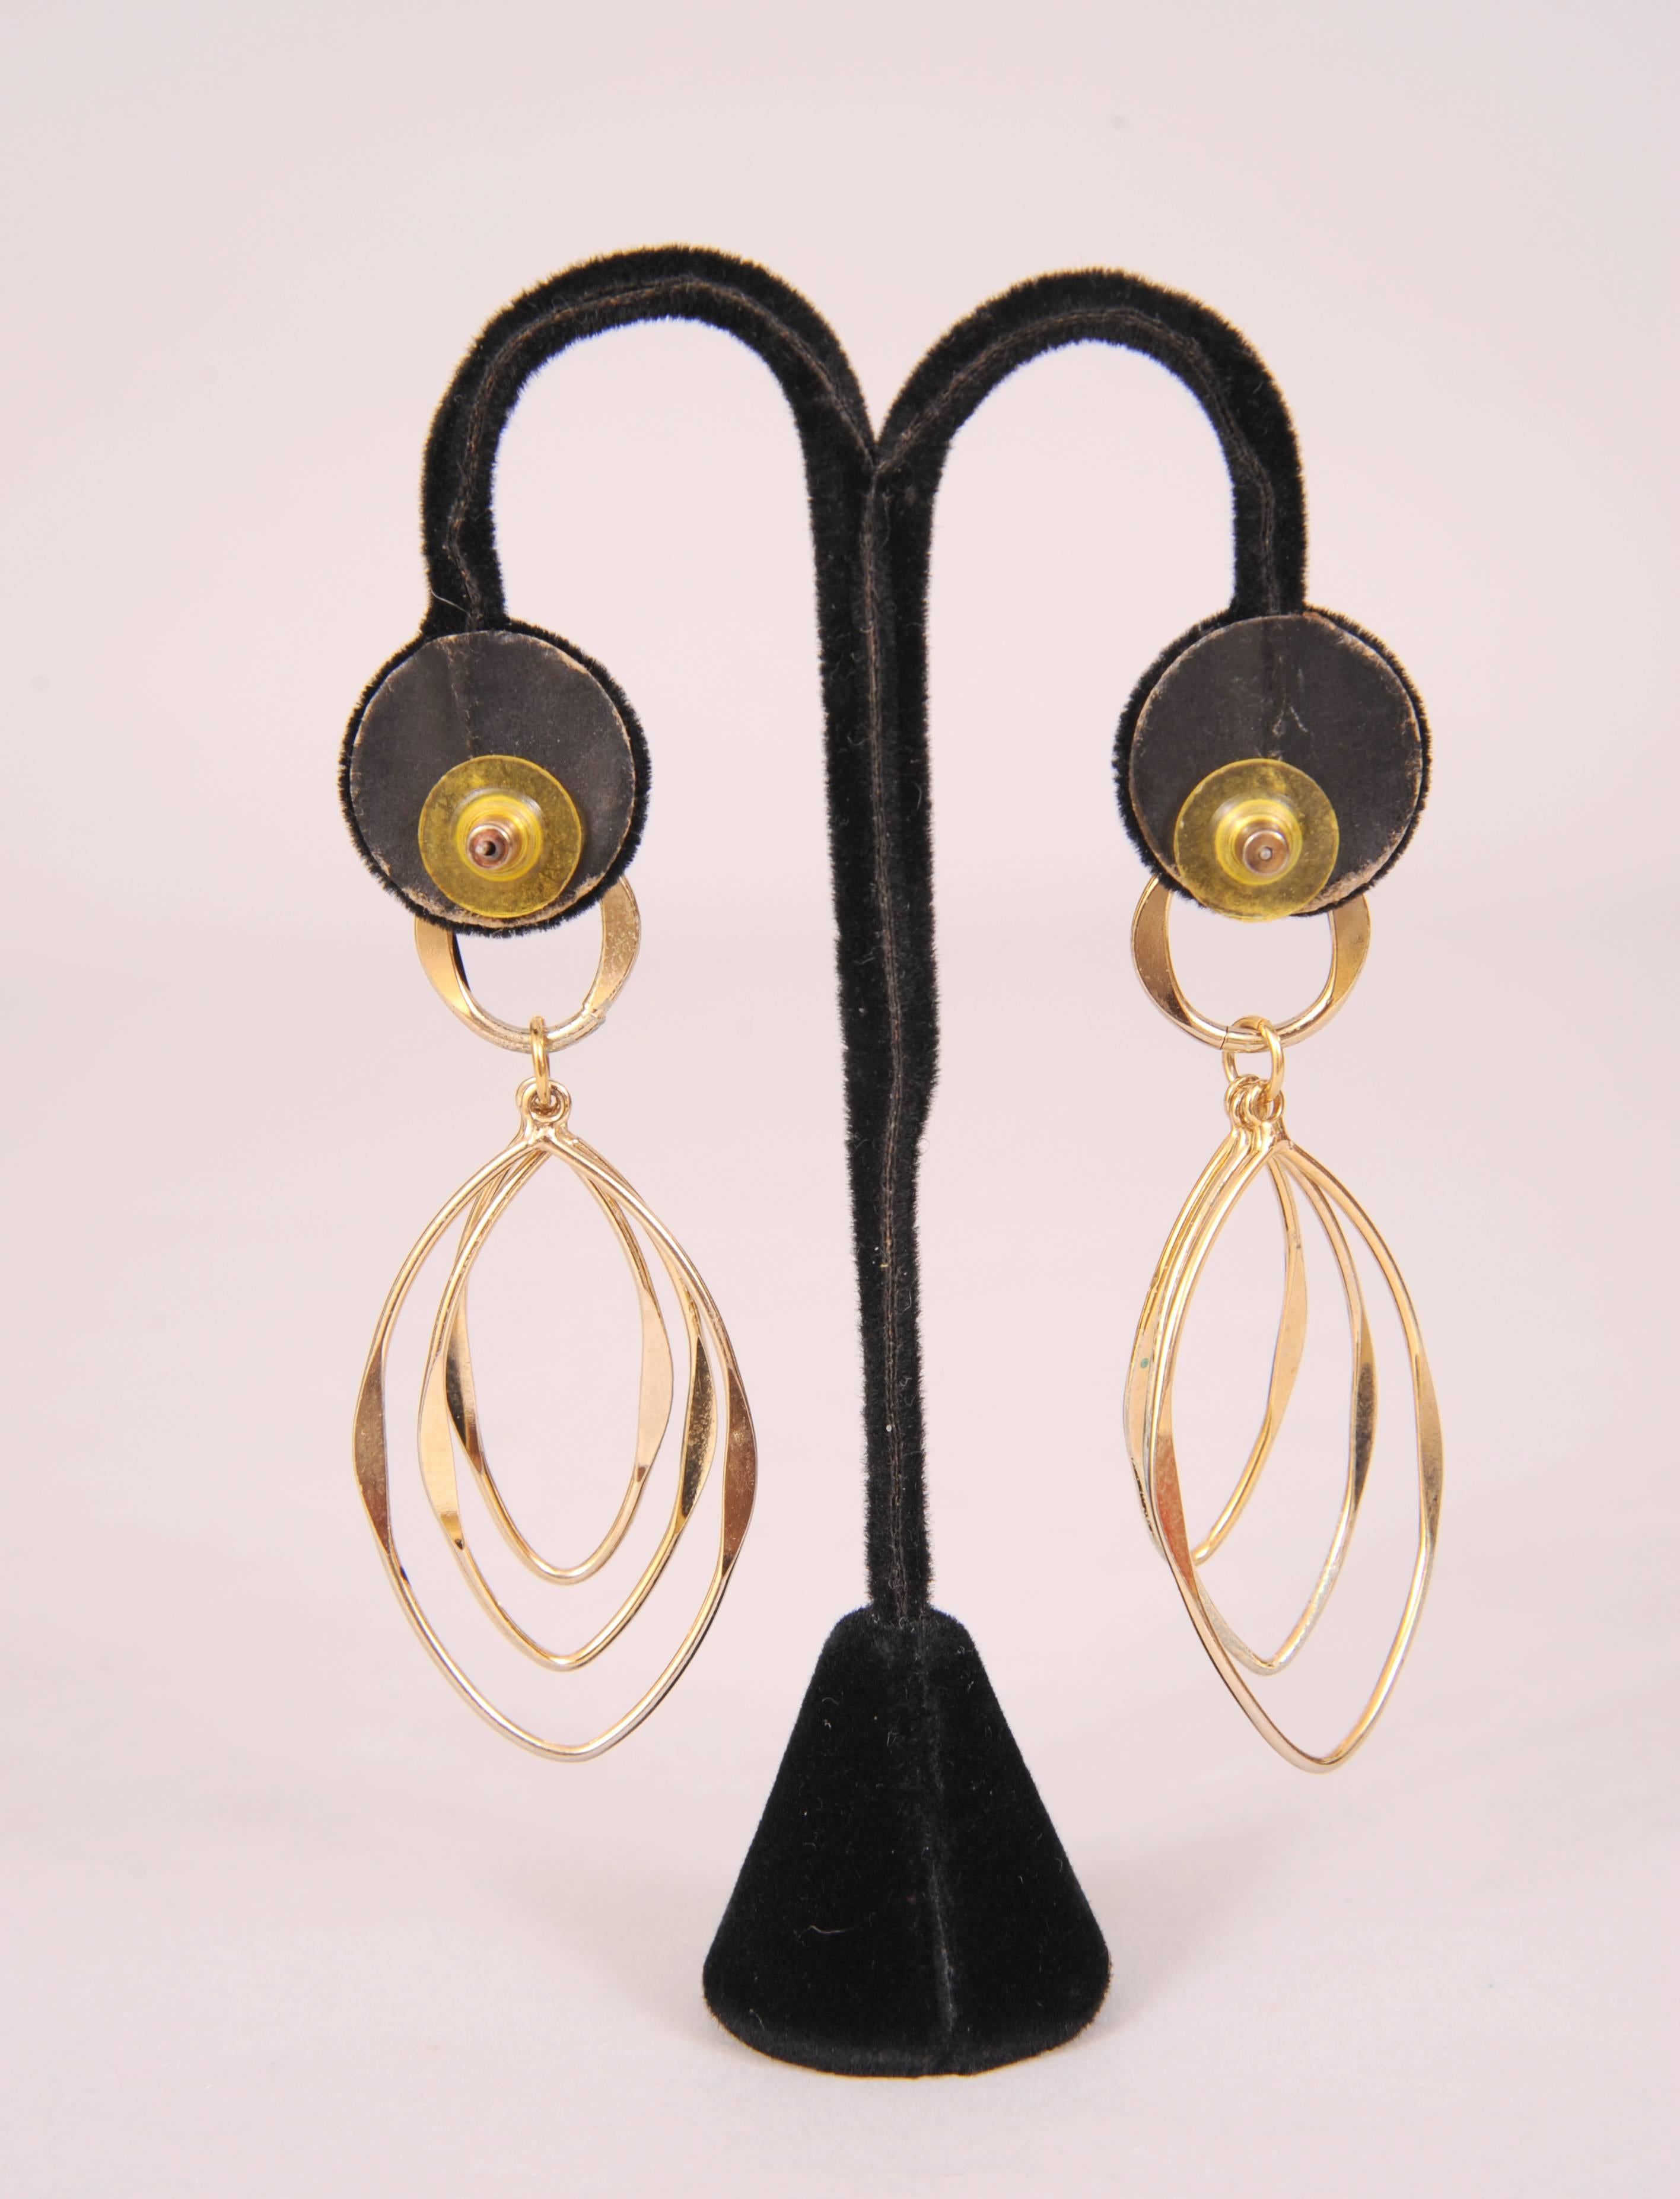 Black Enamel and Gold Dangle Earrings, 1970s In Excellent Condition For Sale In New Hope, PA